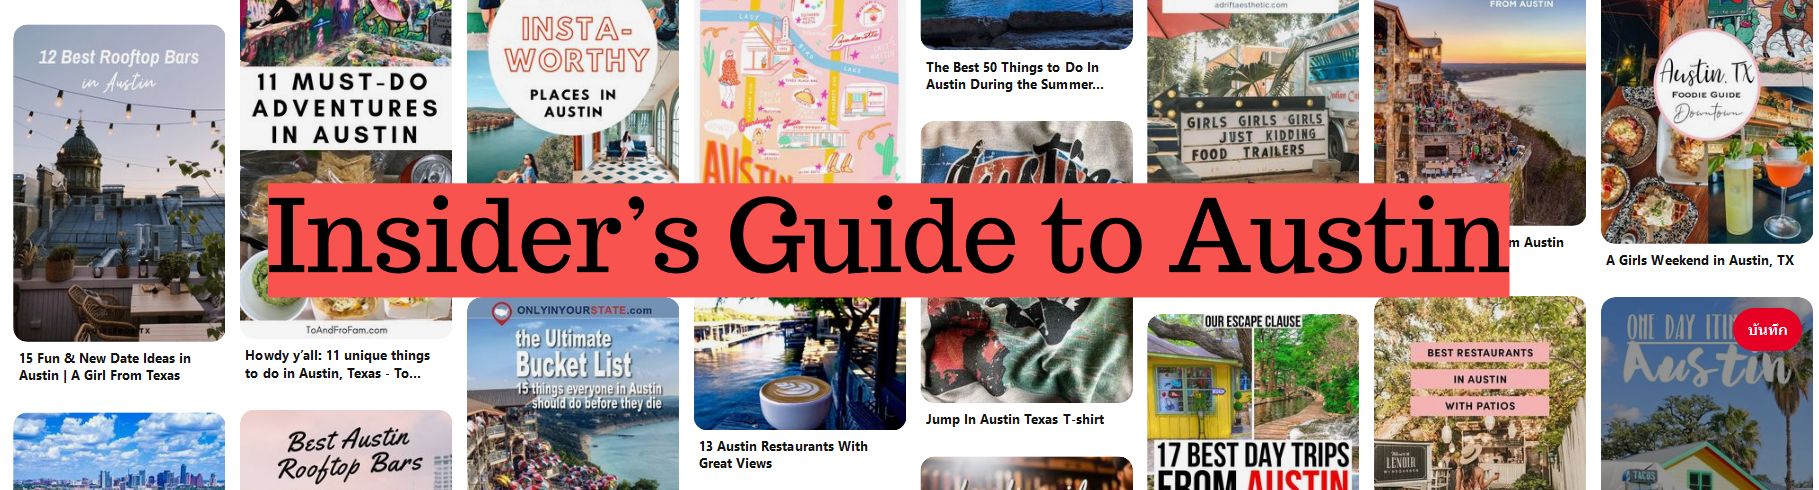 Insider’s Guide to Austin